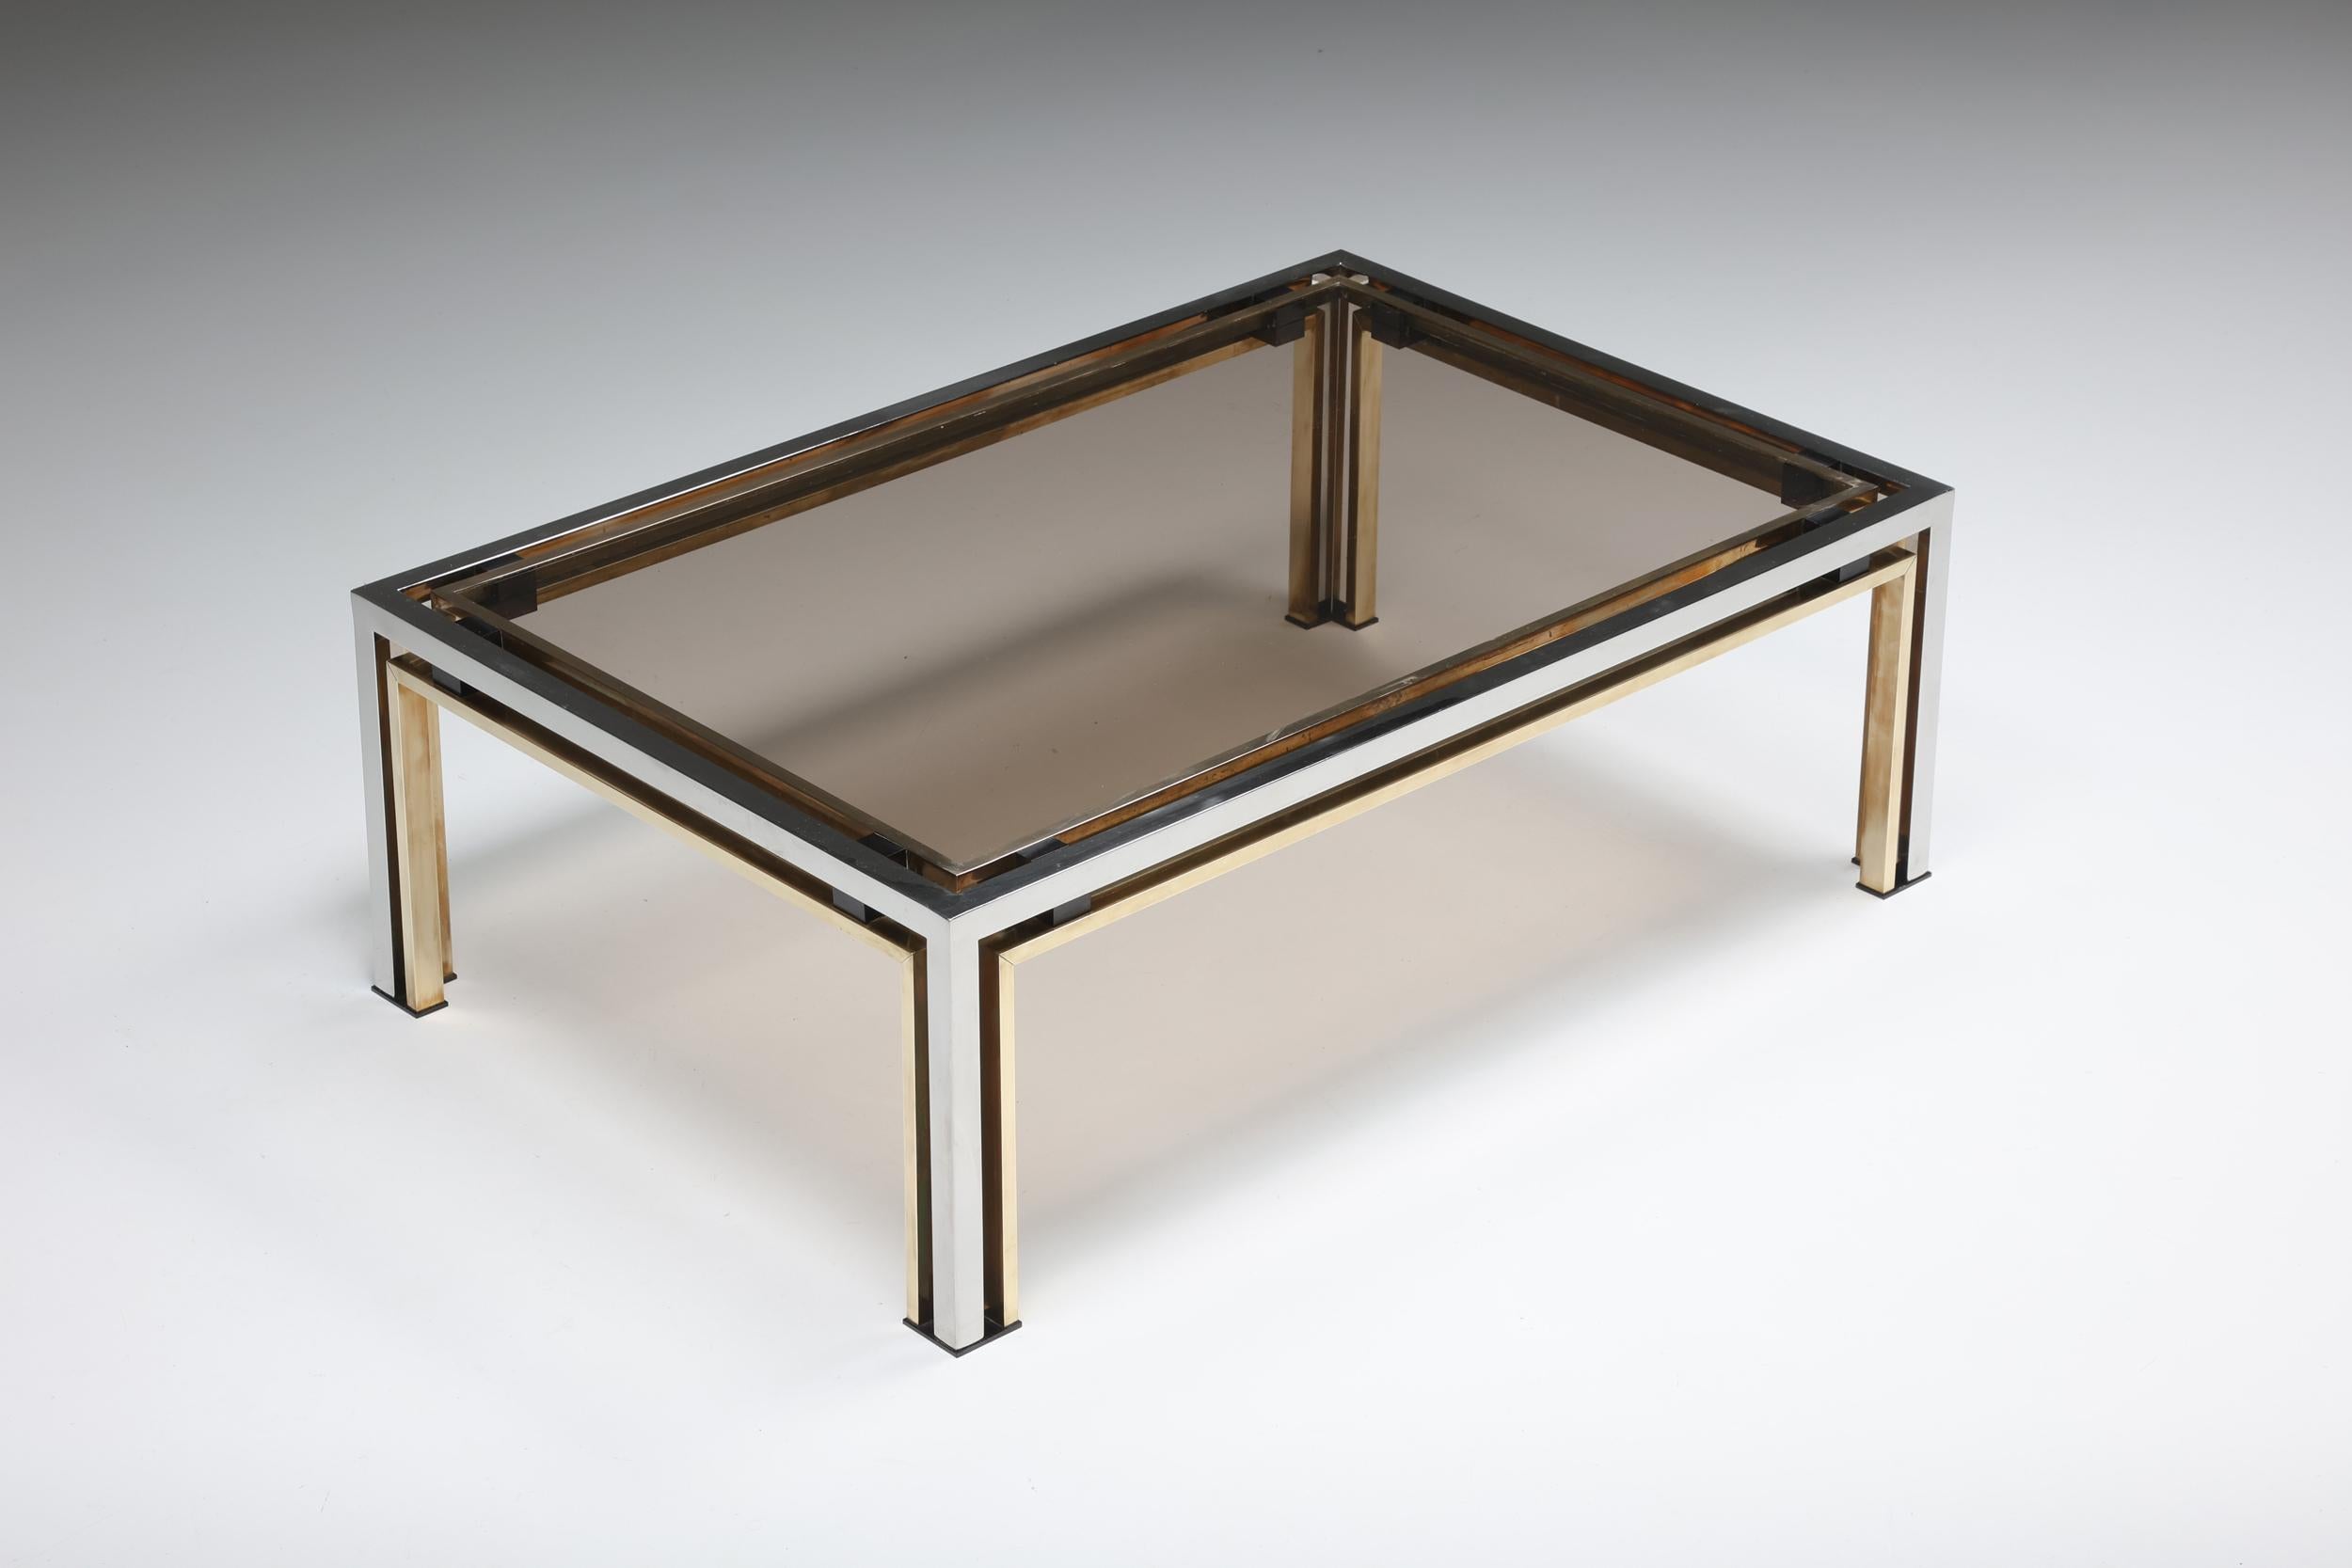 Italian Hollywood Regency Romeo Rega Coffee Table in Brass and Glass, 1970's For Sale